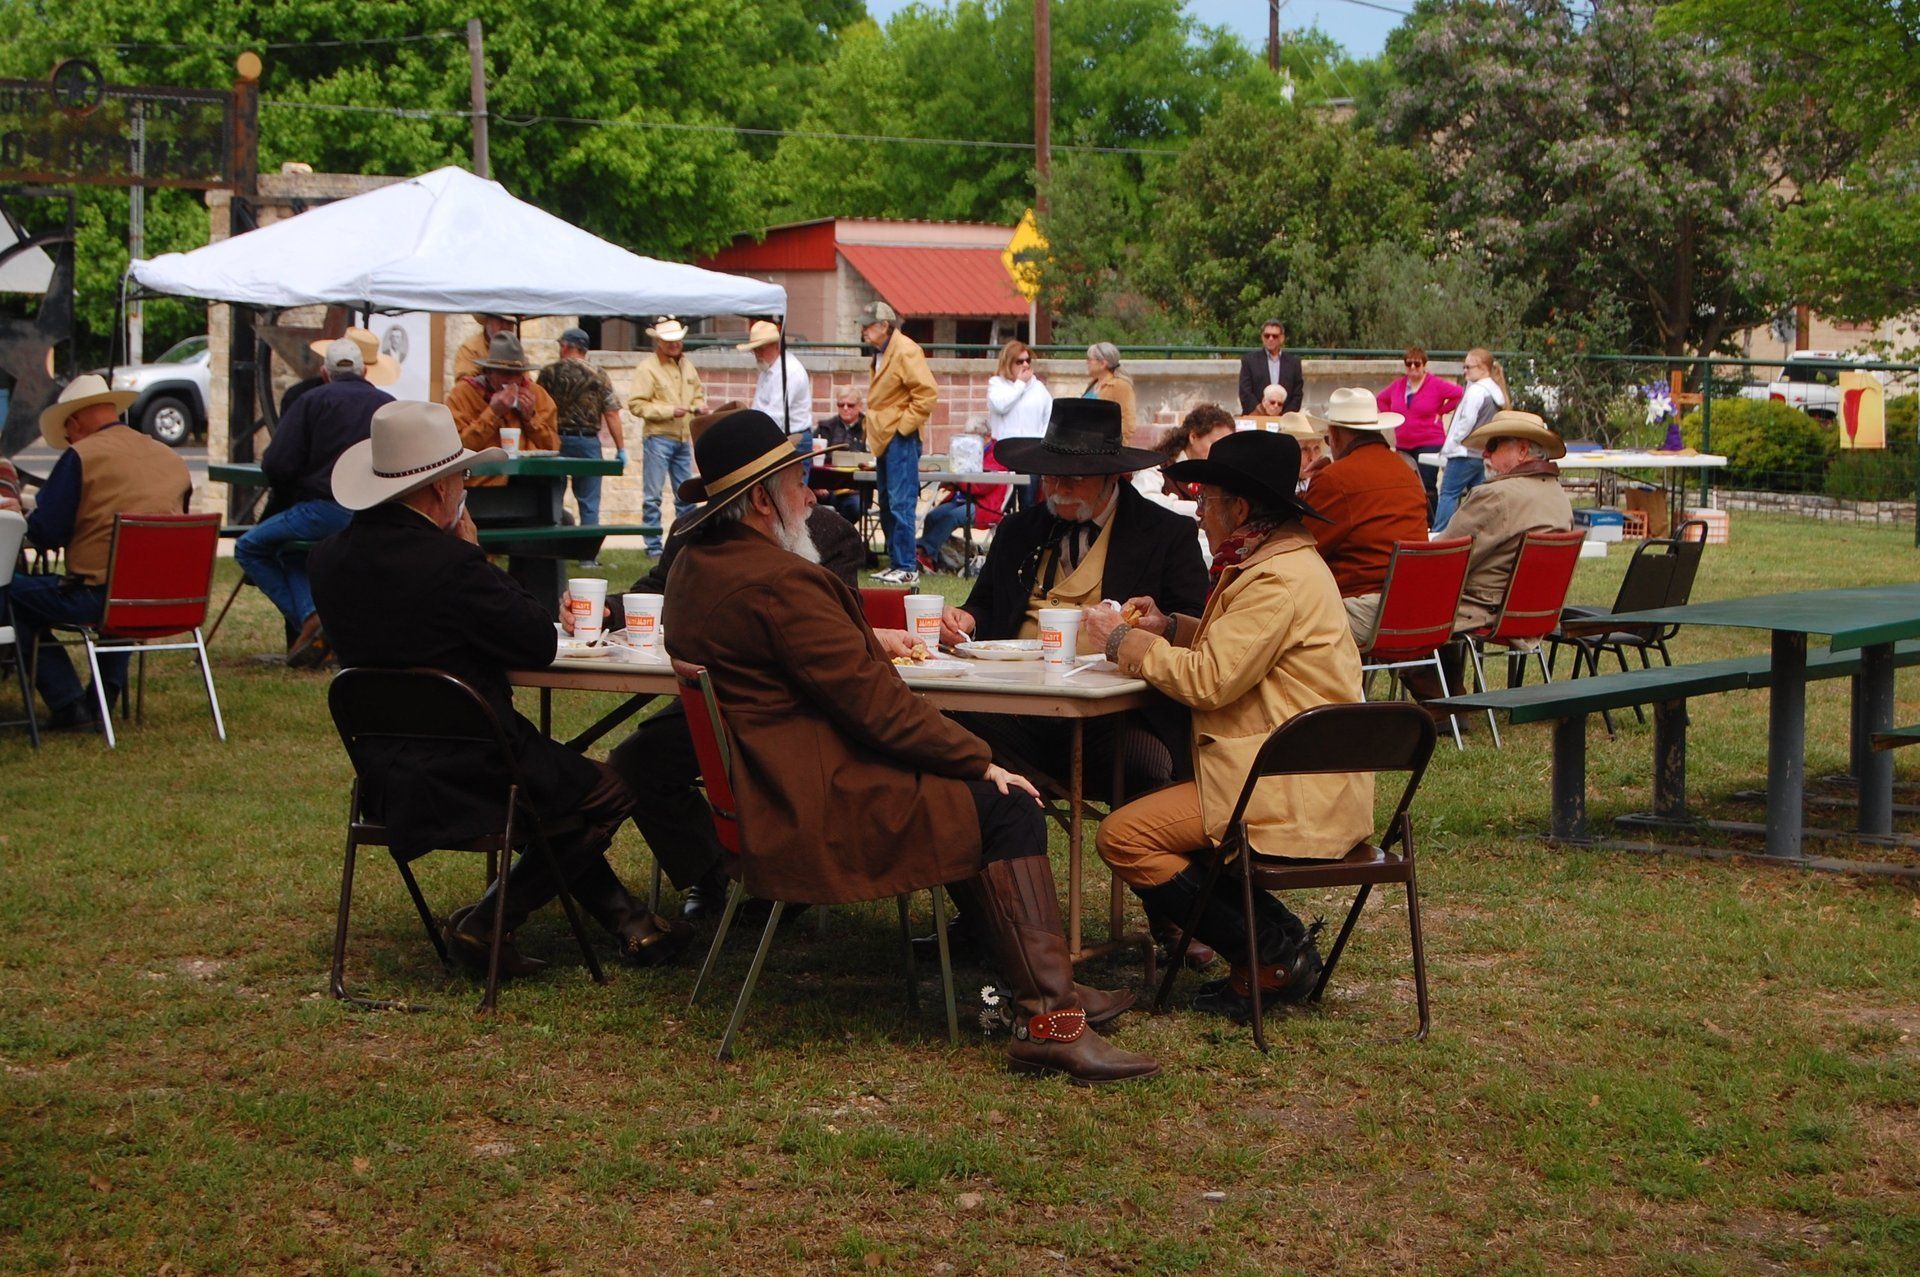 former Texas Rangers in period costume eat barbeque, too!